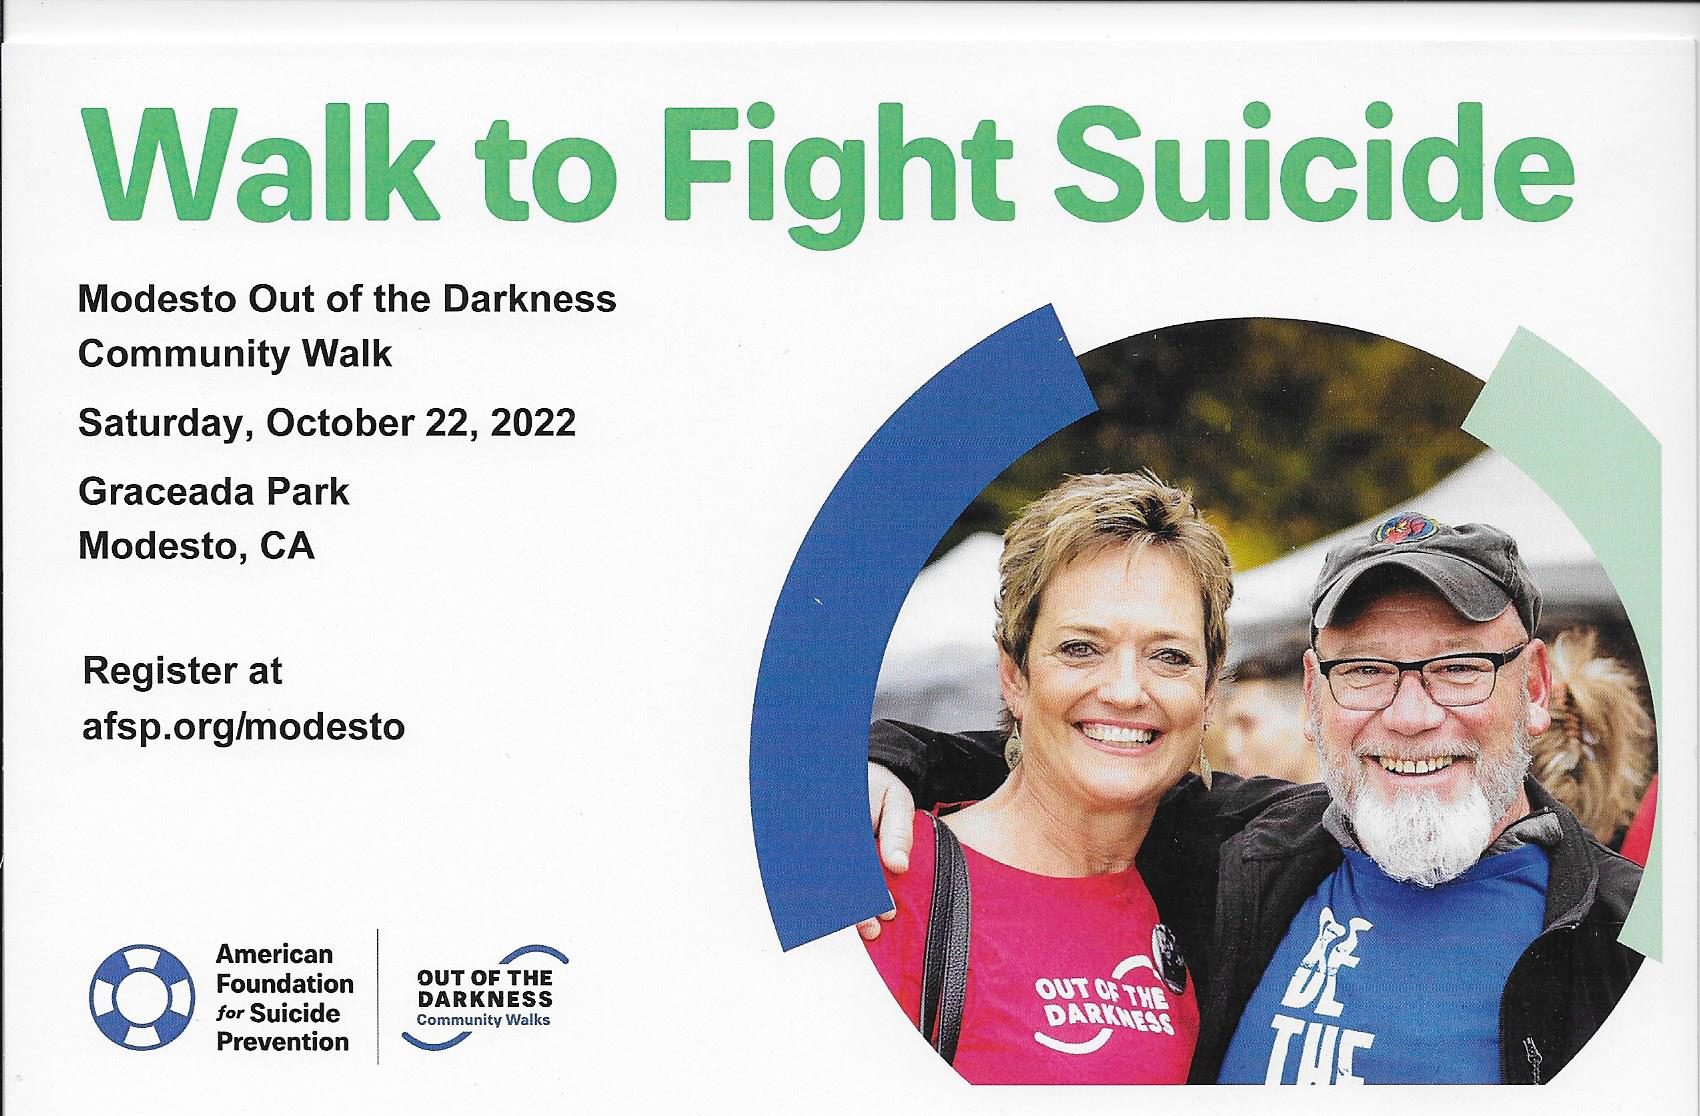 WALK TO FIGHT SUICIDE